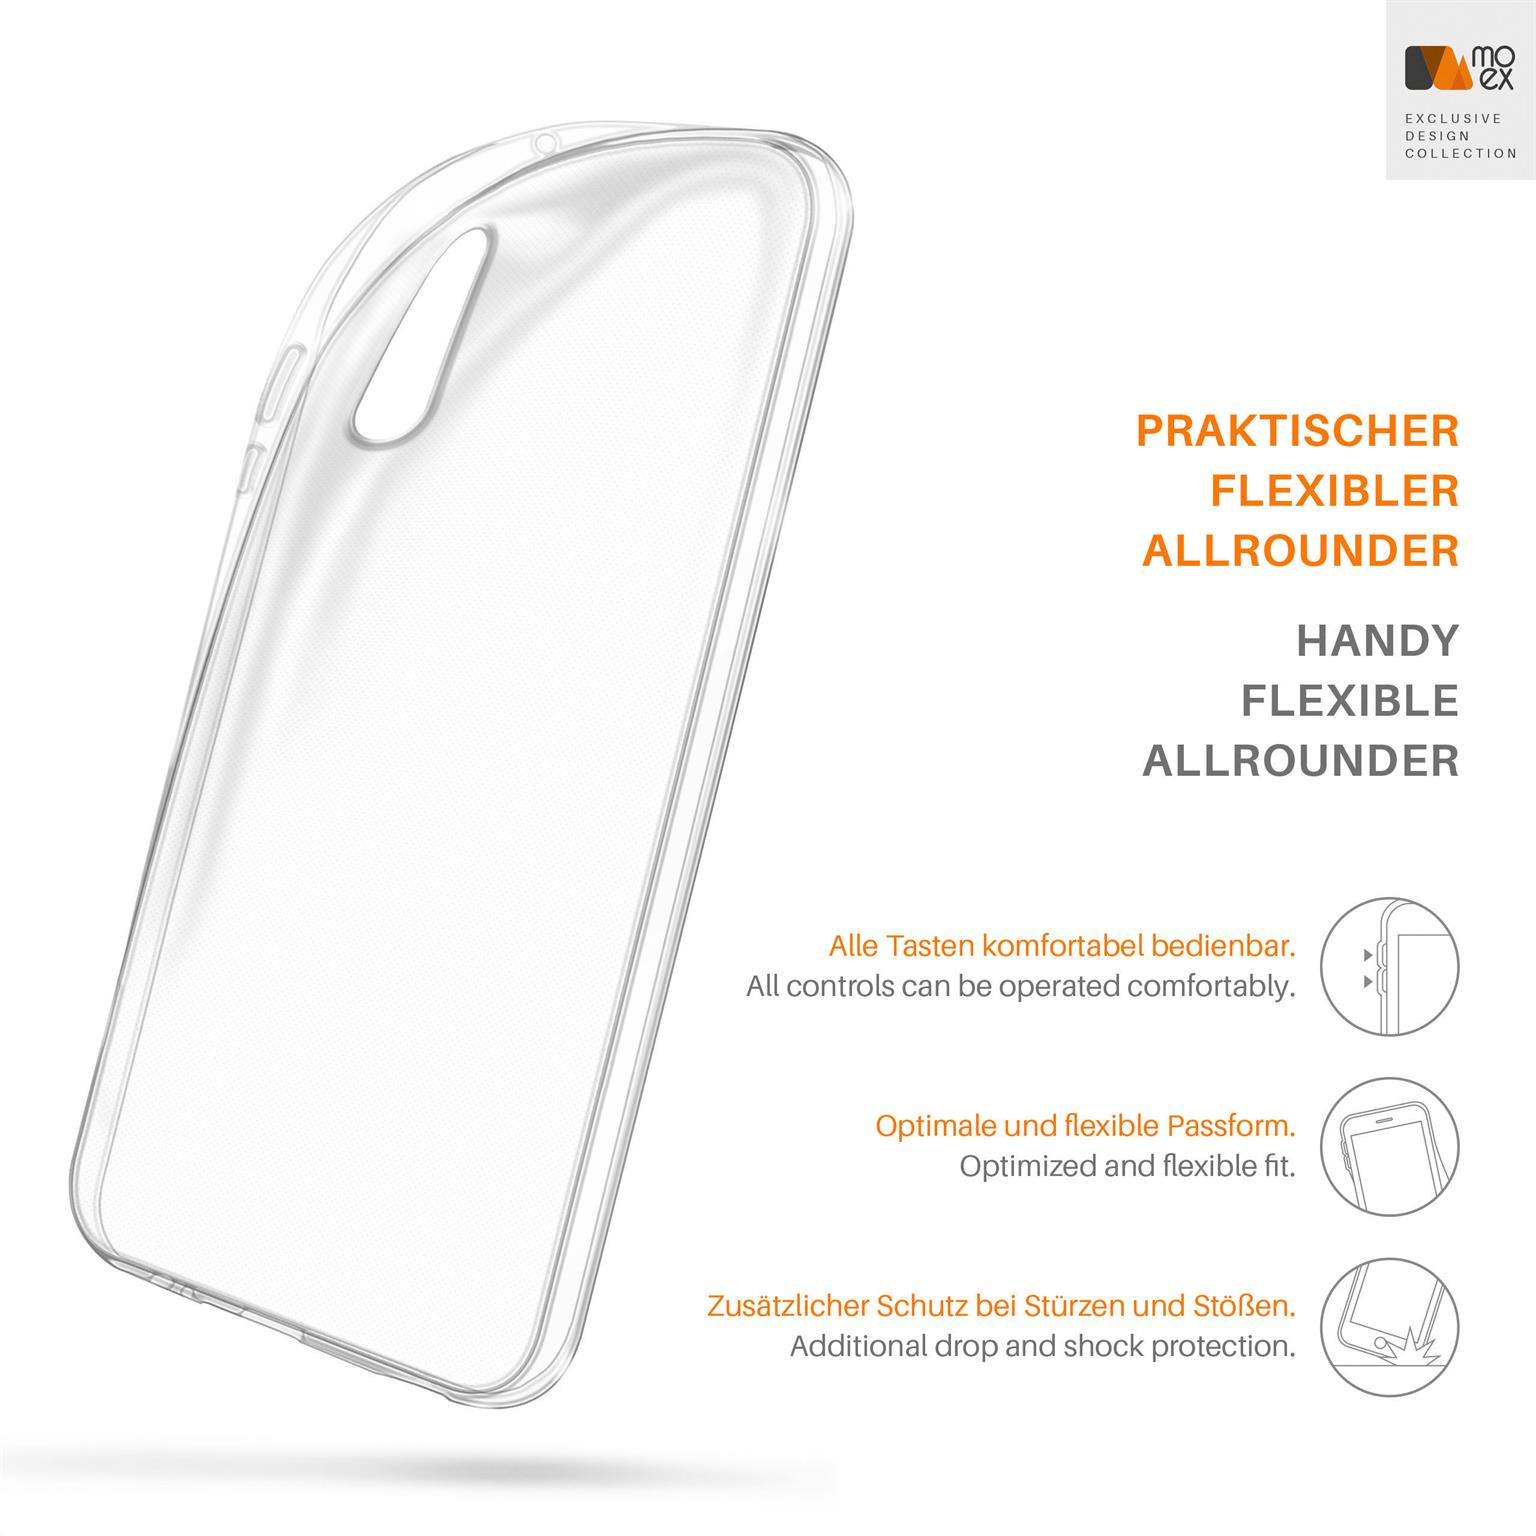 MOEX Aero Case, Backcover, Huawei, Pro, Crystal-Clear P20